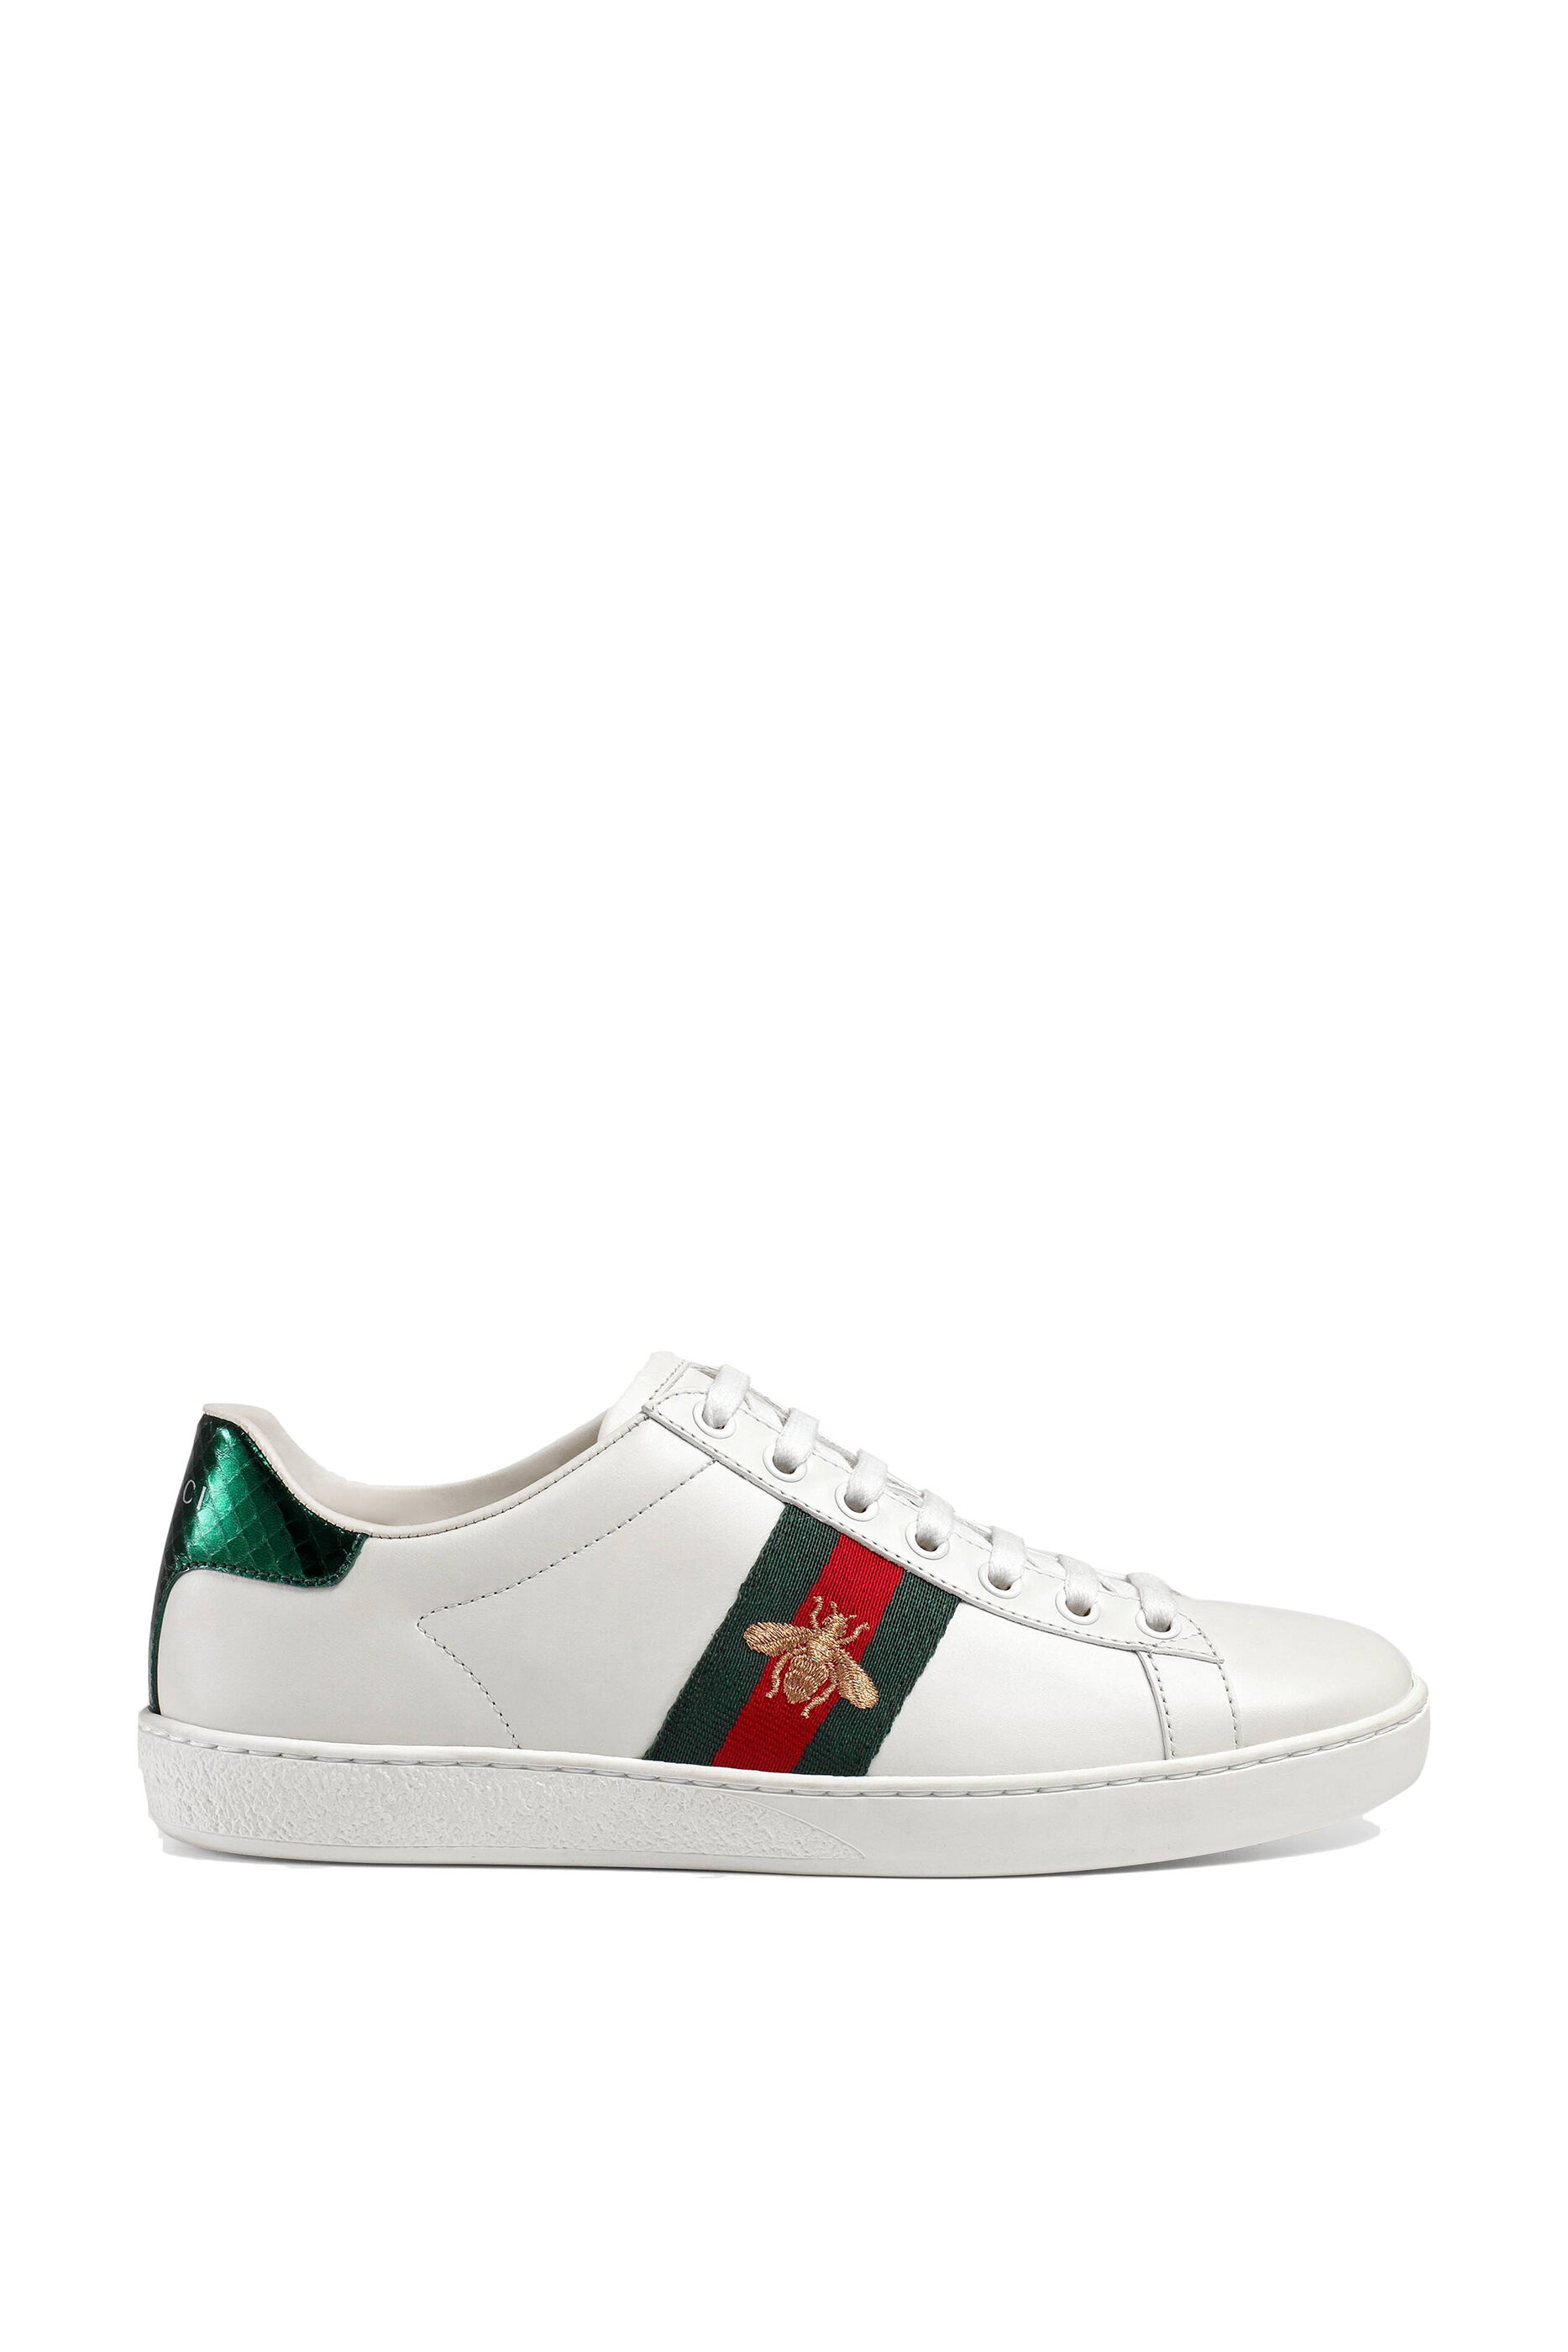 Buy Gucci Ace Embroidered Sneakers for 